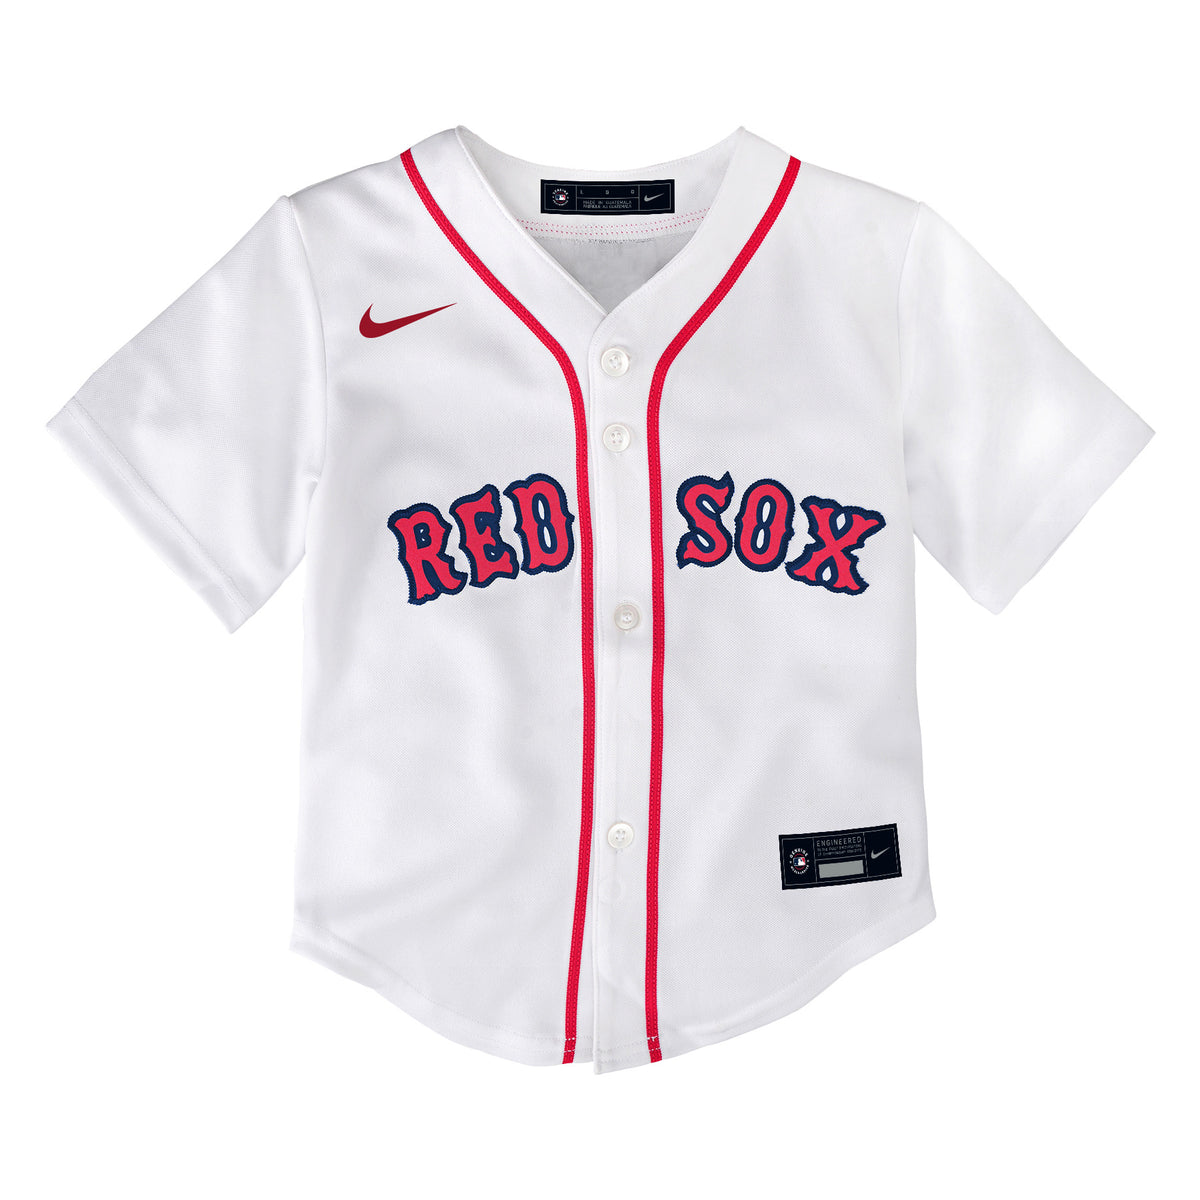 Cheap Boston Red Sox Apparel, Discount Red Sox Gear, MLB Red Sox